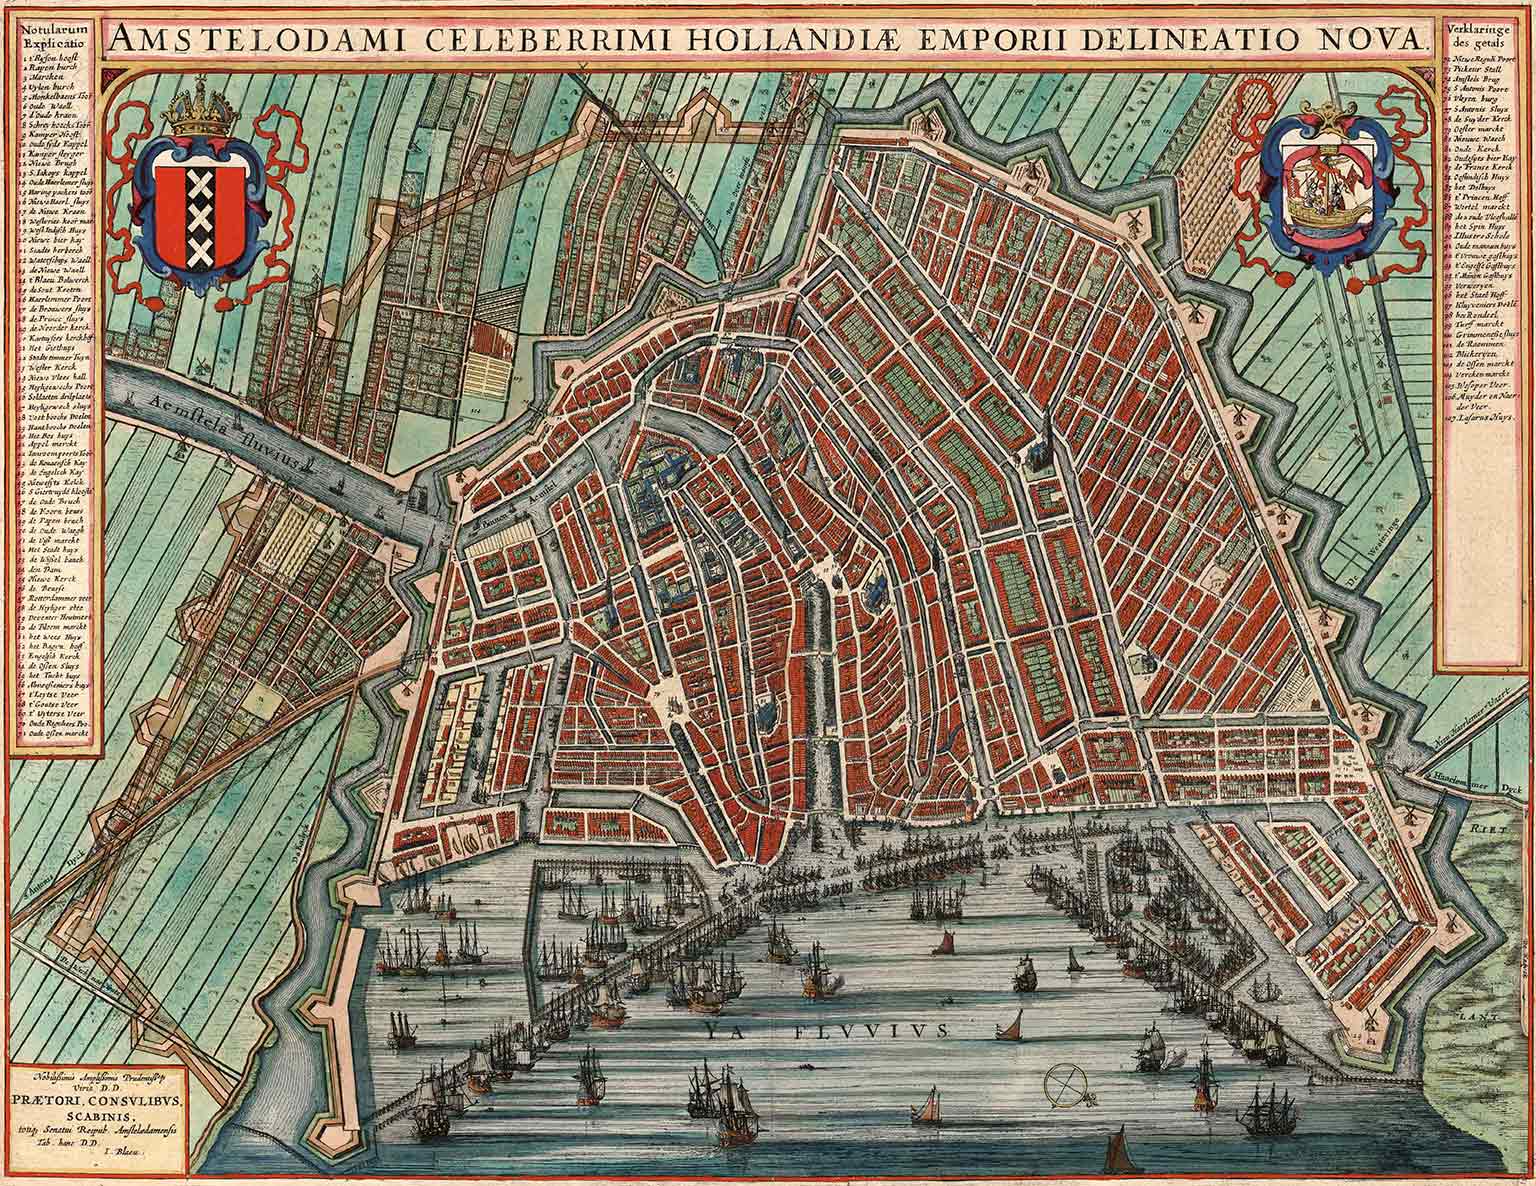 Map of Amsterdam from 1649 by Johannes Blaeu